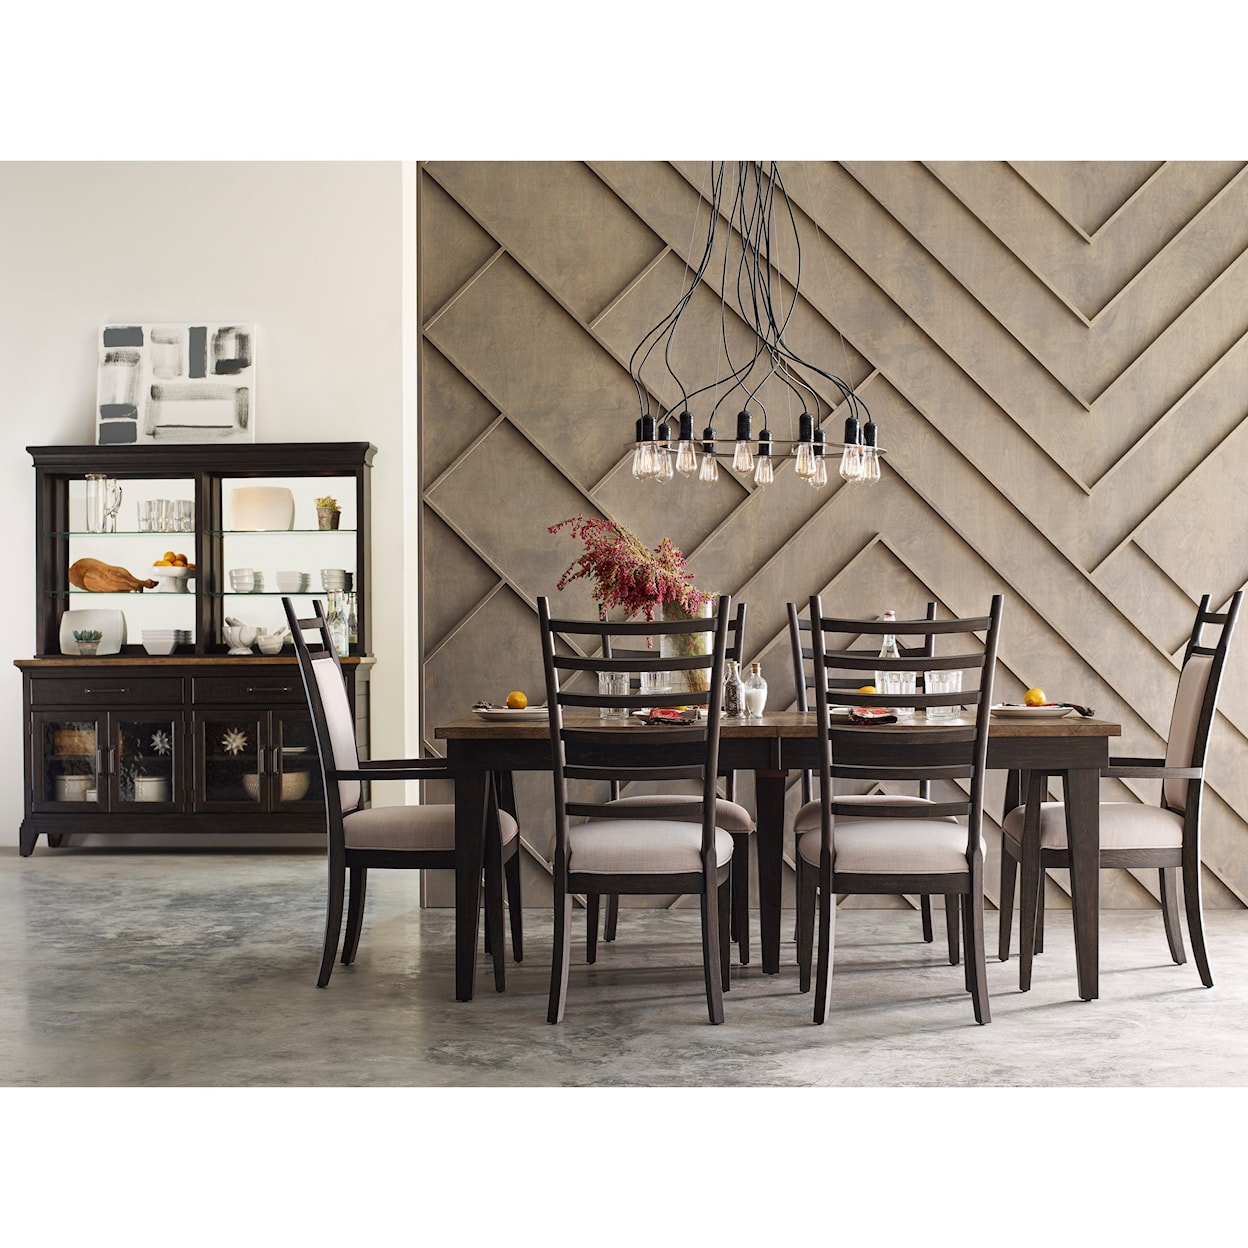 Kincaid Furniture Plank Road Formal Dining Room Group